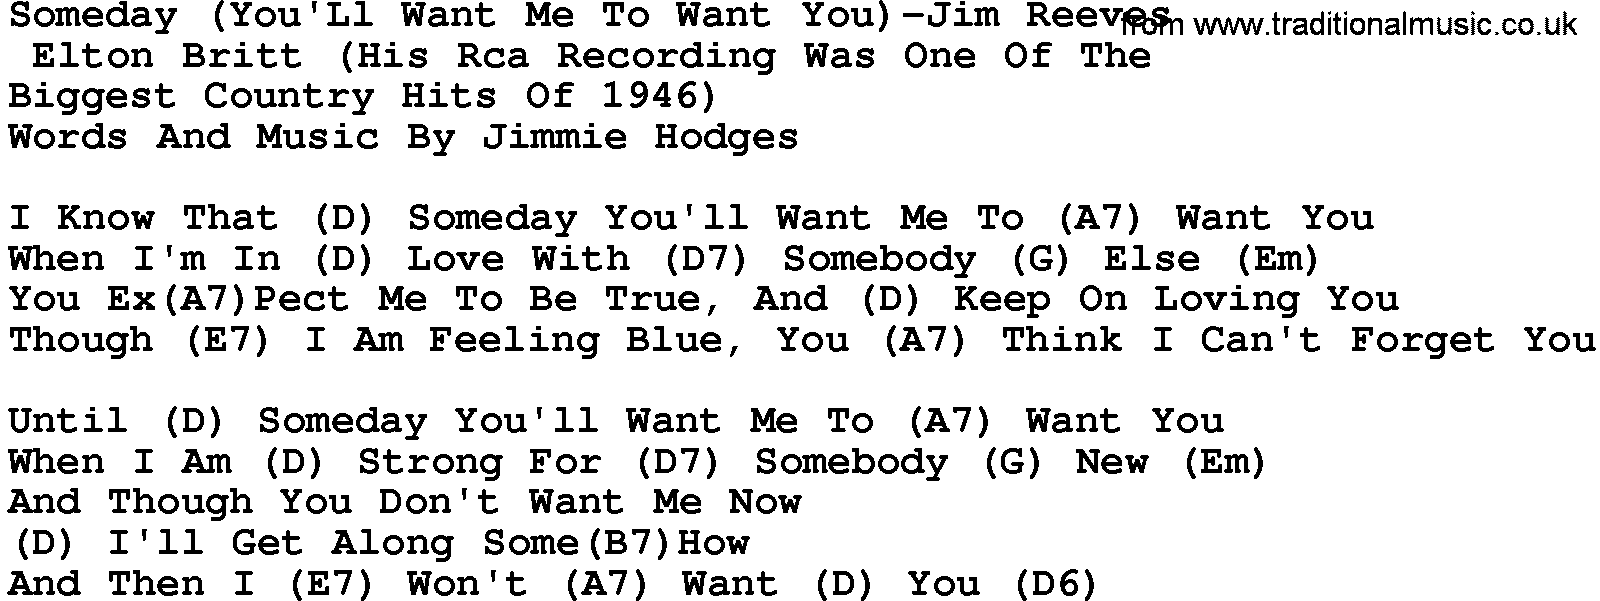 Country music song: Someday(You'll Want Me To Want You)-Jim Reeves lyrics and chords